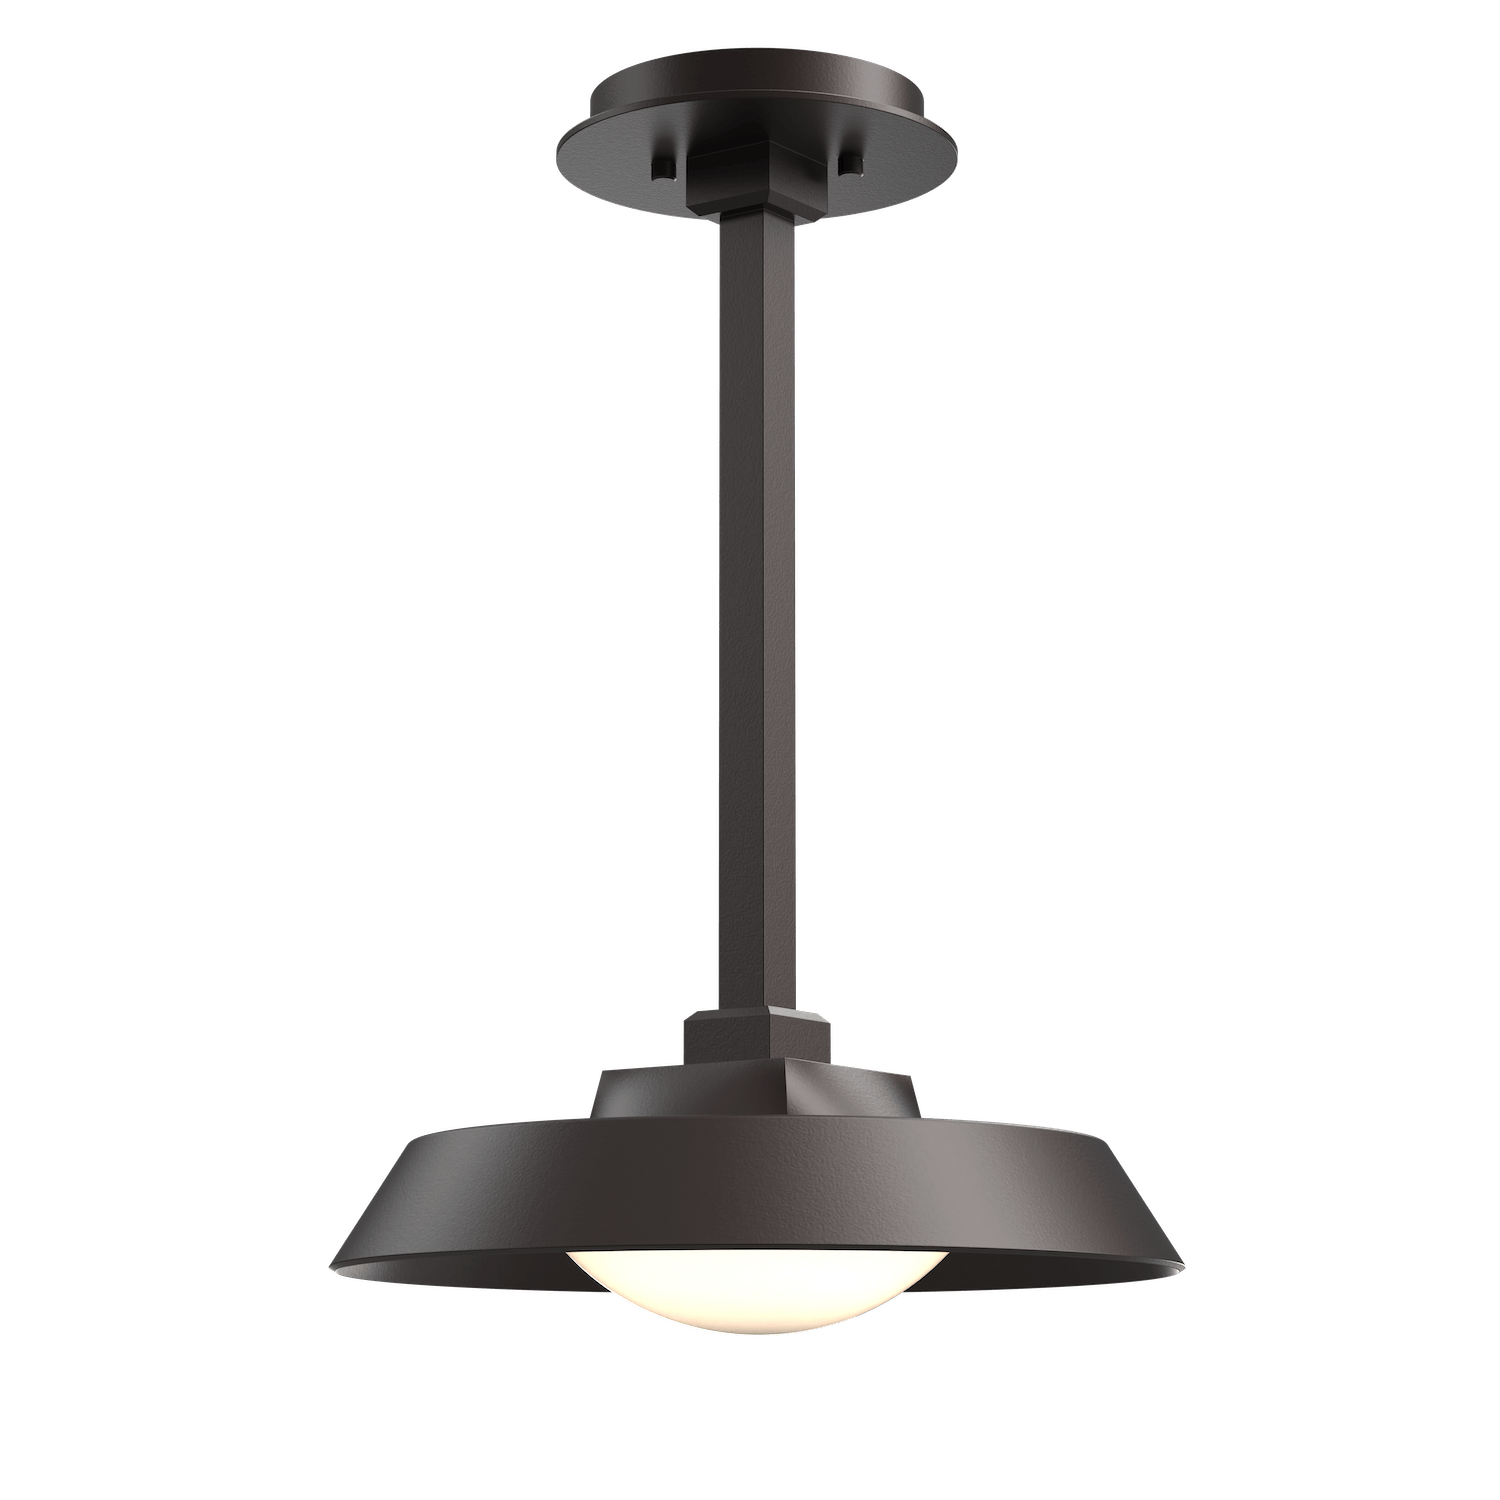 OPB0073-01-SB-O-Hammerton-Studio-Farmhouse-12-inch-outdoor-pendant-light-with-statuary-bronze-finish-and-frosted-glass-shade-and-LED-lamping